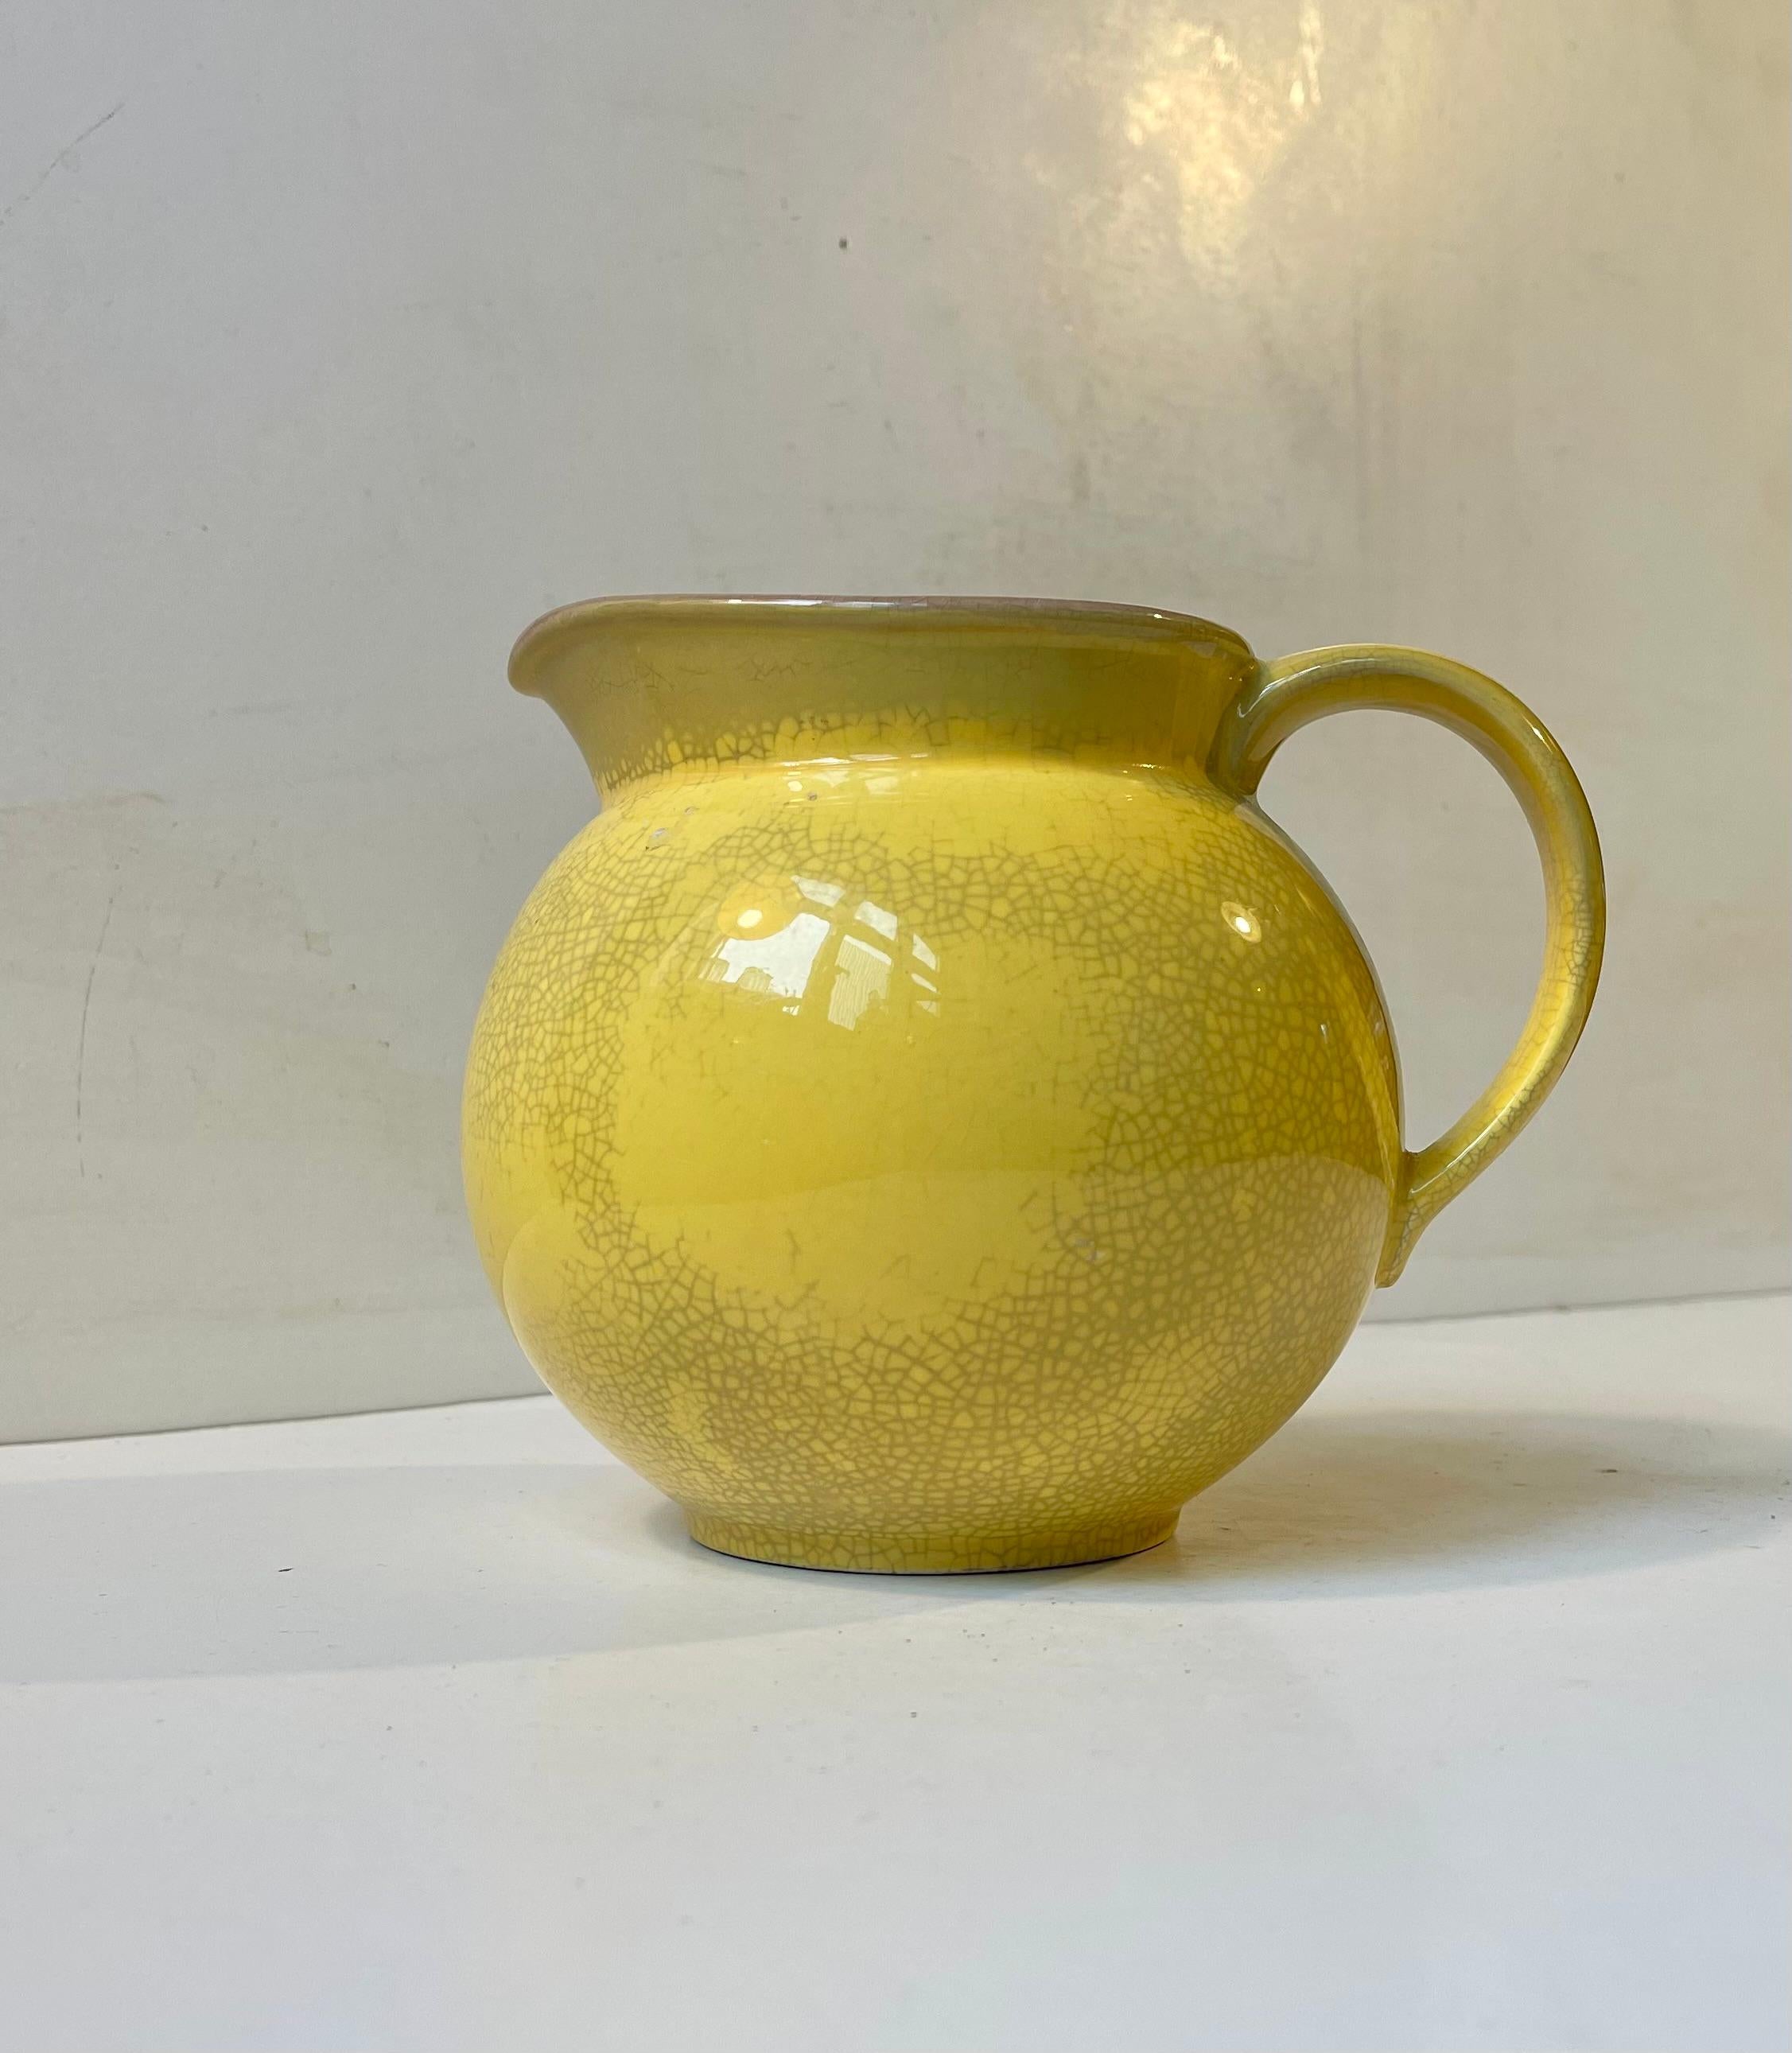 A rare yellow jug or milk pitcher designed by Nils Thorsson and manufactured by Aluminia in Denmark during the 1930s or 40s. Featuring a delicate crackle glaze to its interior. Its a predecessor to Confetti/sSusanne series. Marked to its base with